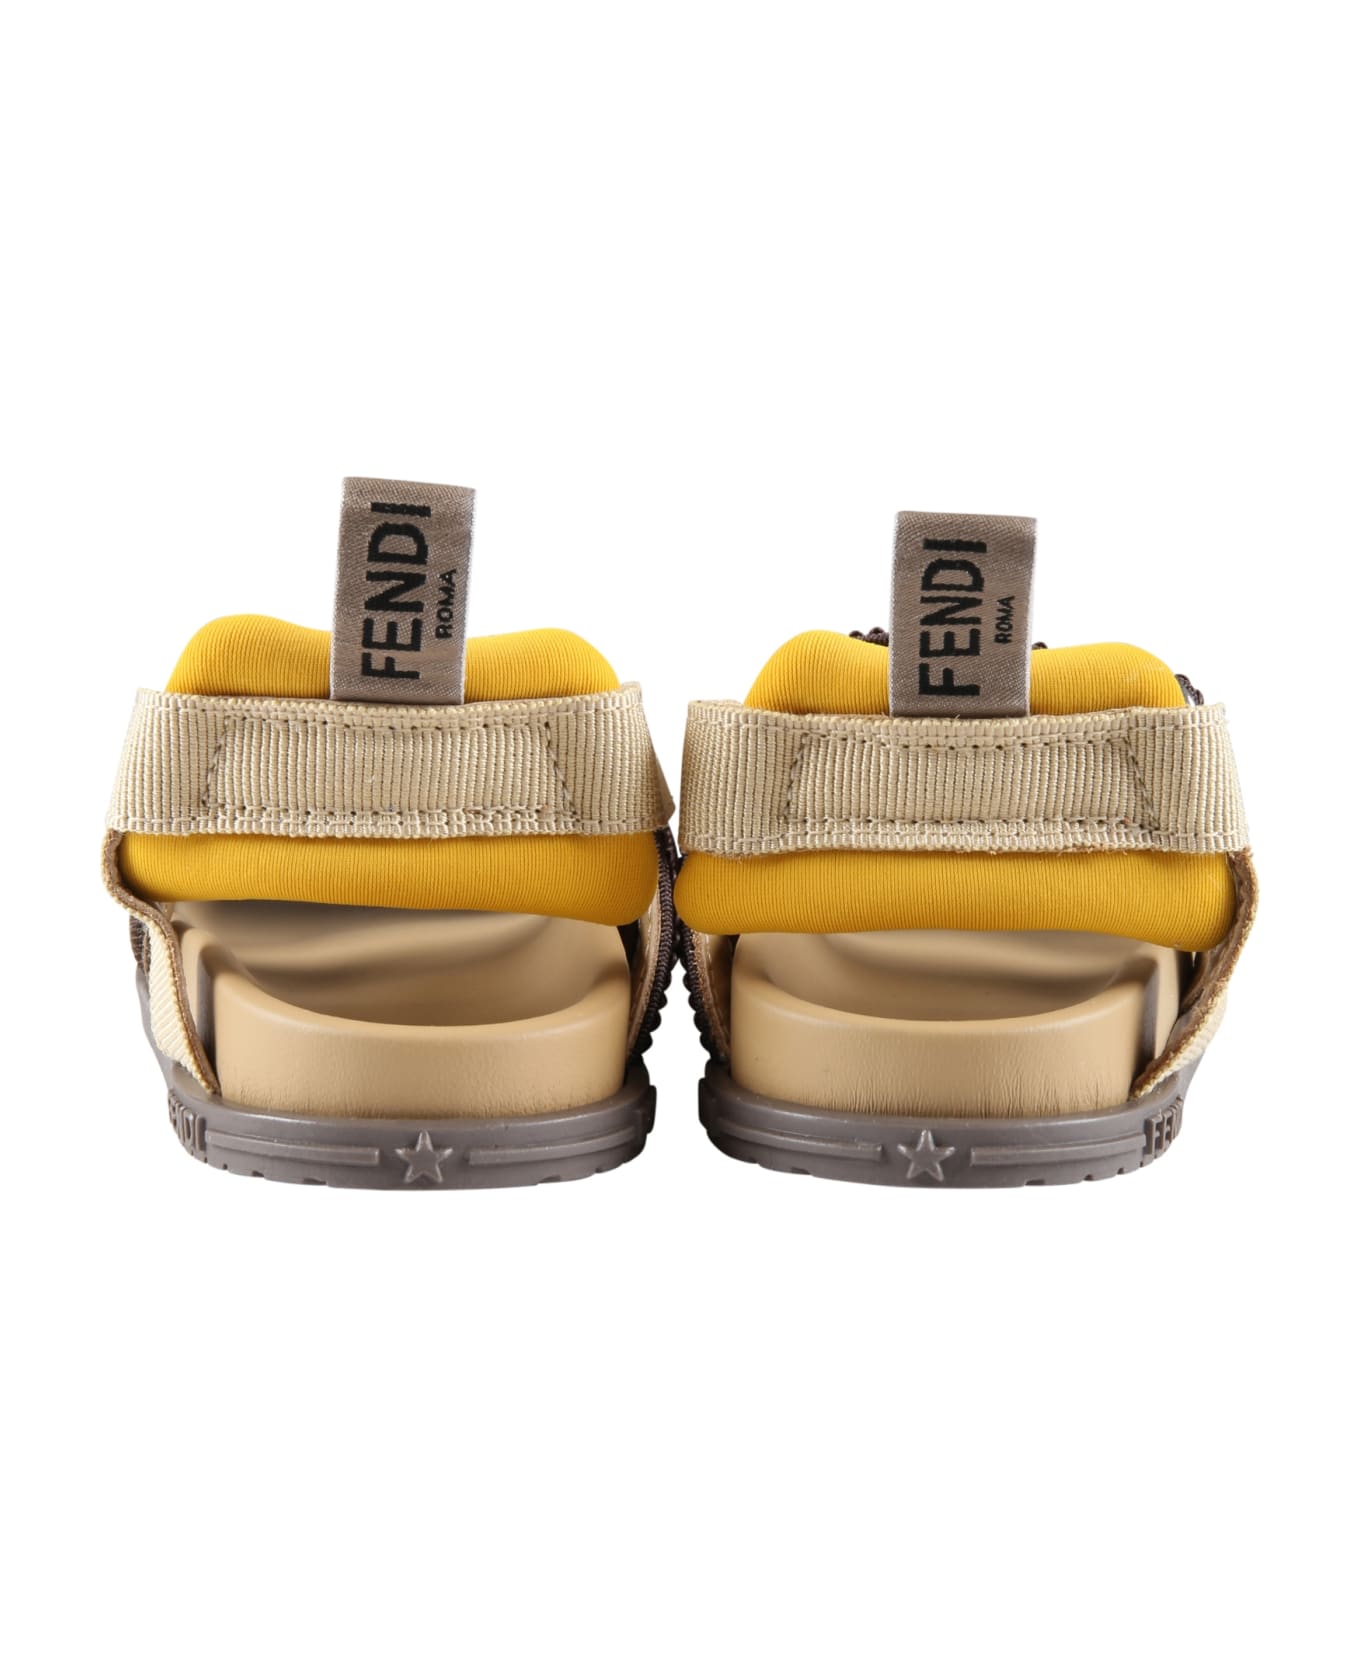 Fendi Brown Sandals For Kids With Ff - Brown